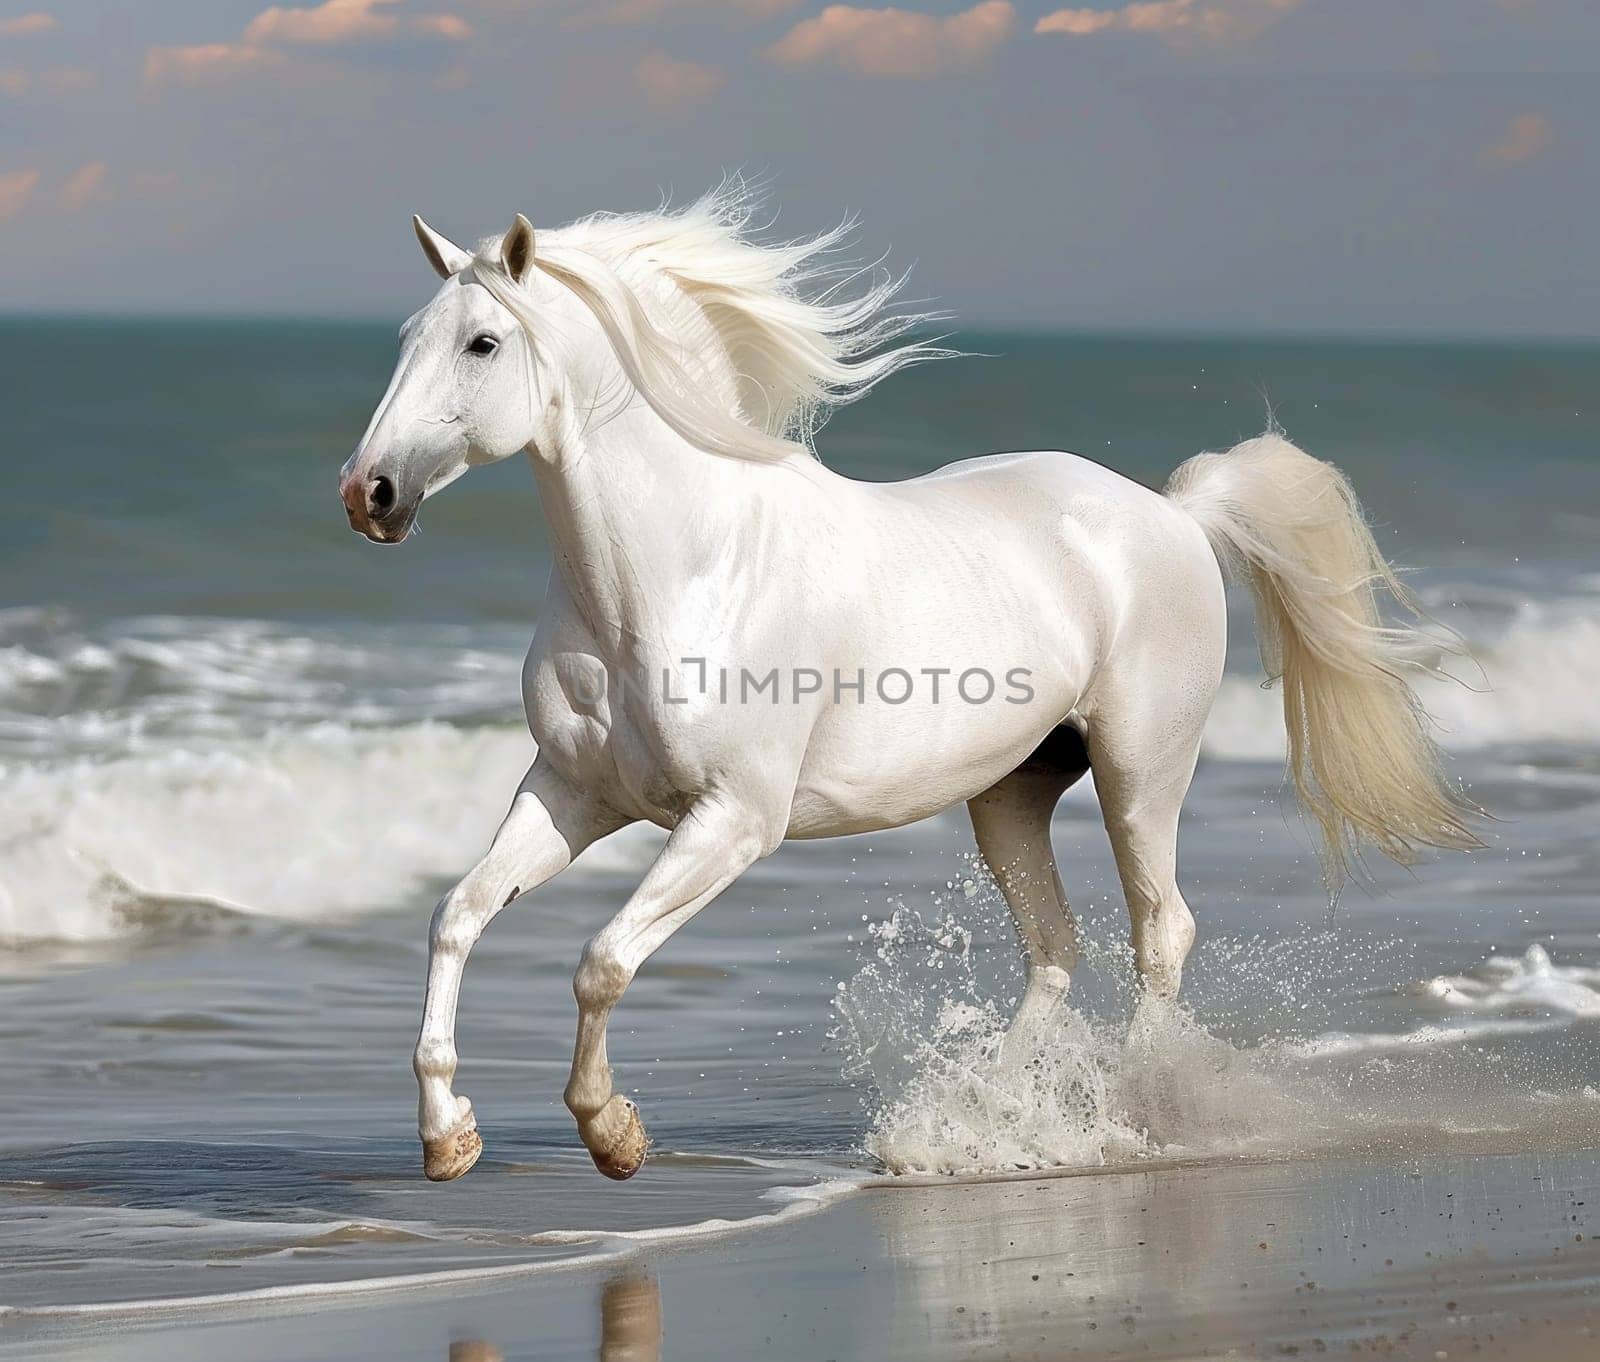 White horse galloping along beach with stunning water view in background perfect travel escape scene by Vichizh